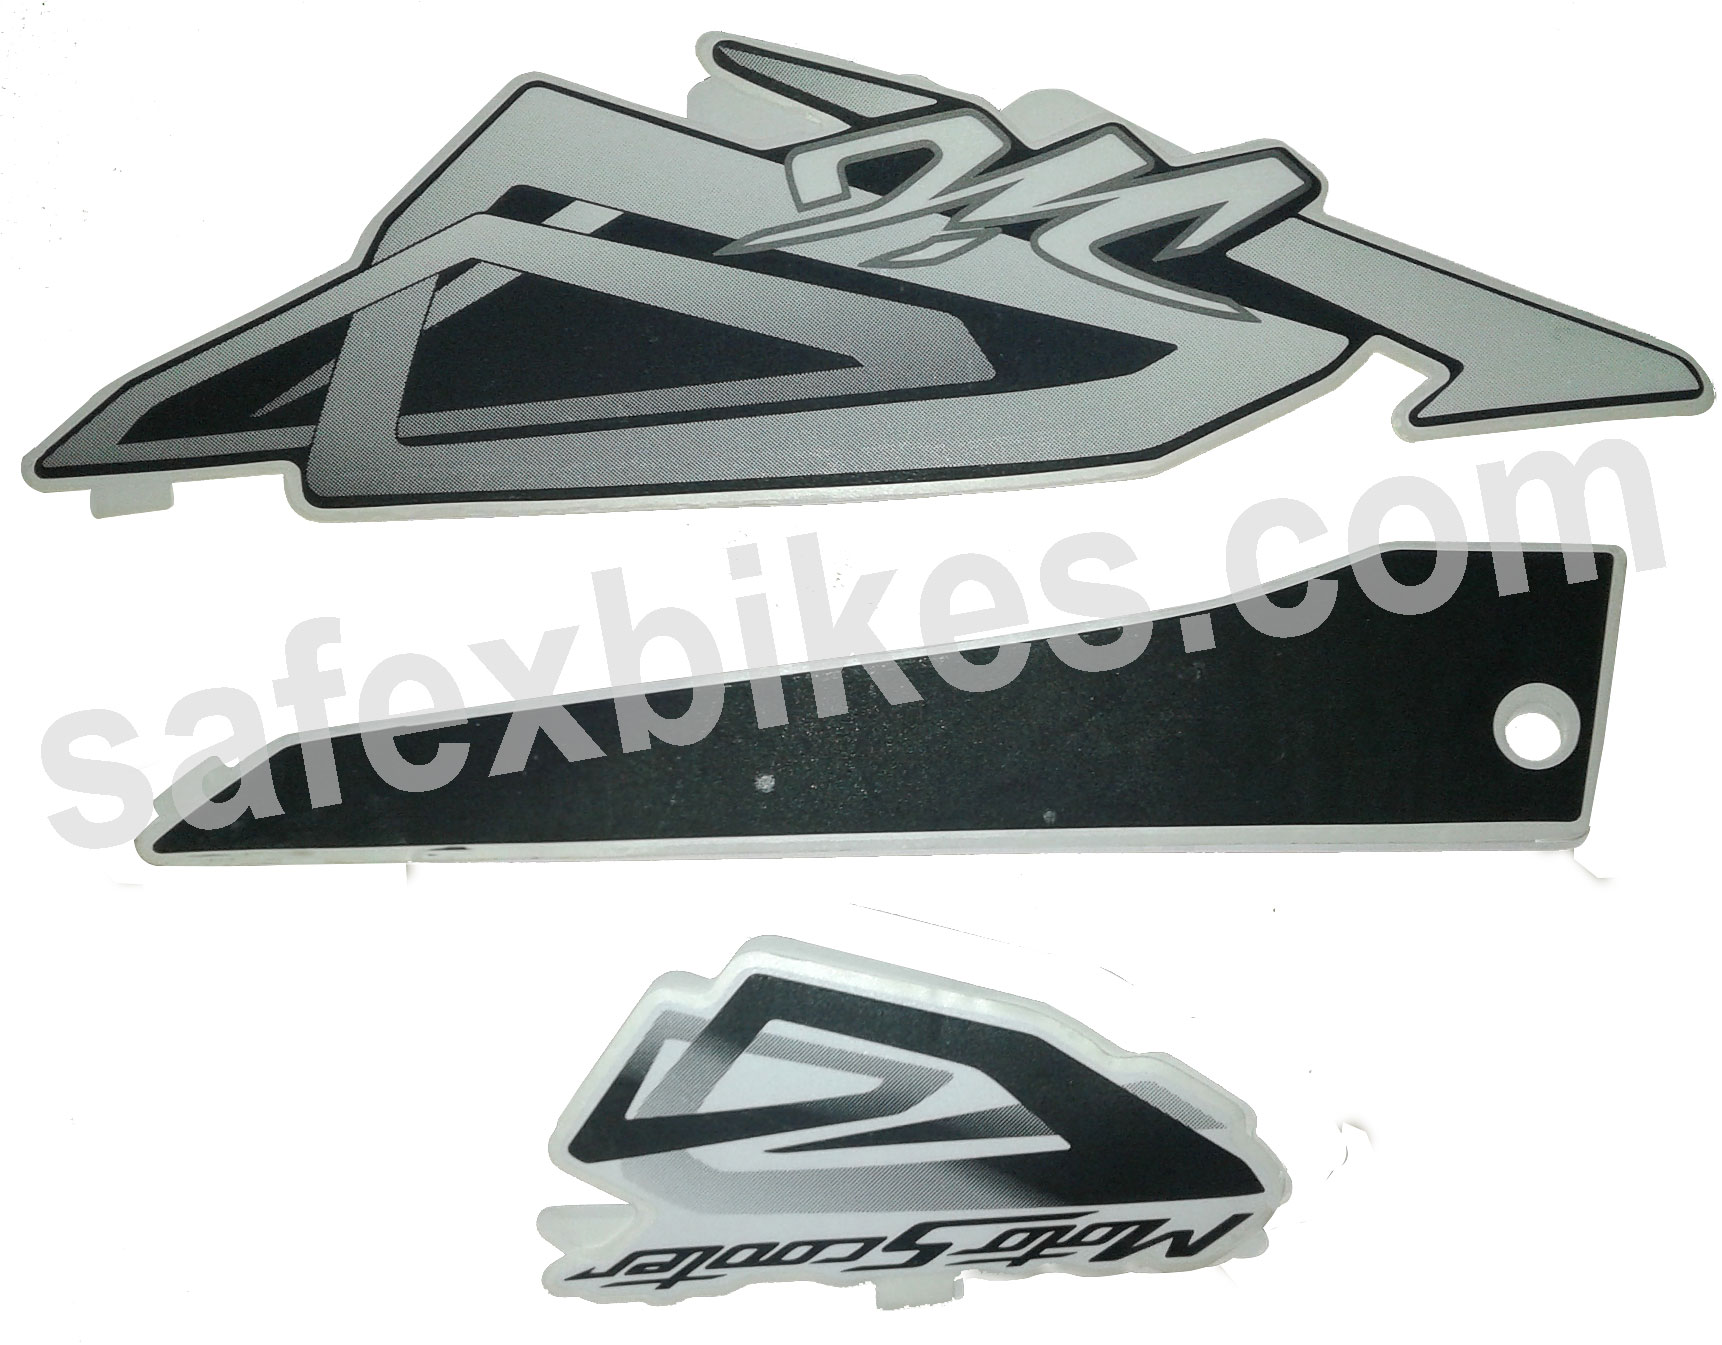 Complete Sticker Kit Dio 110 2015 Zadon Motorcycle Parts For Honda Dio 2015